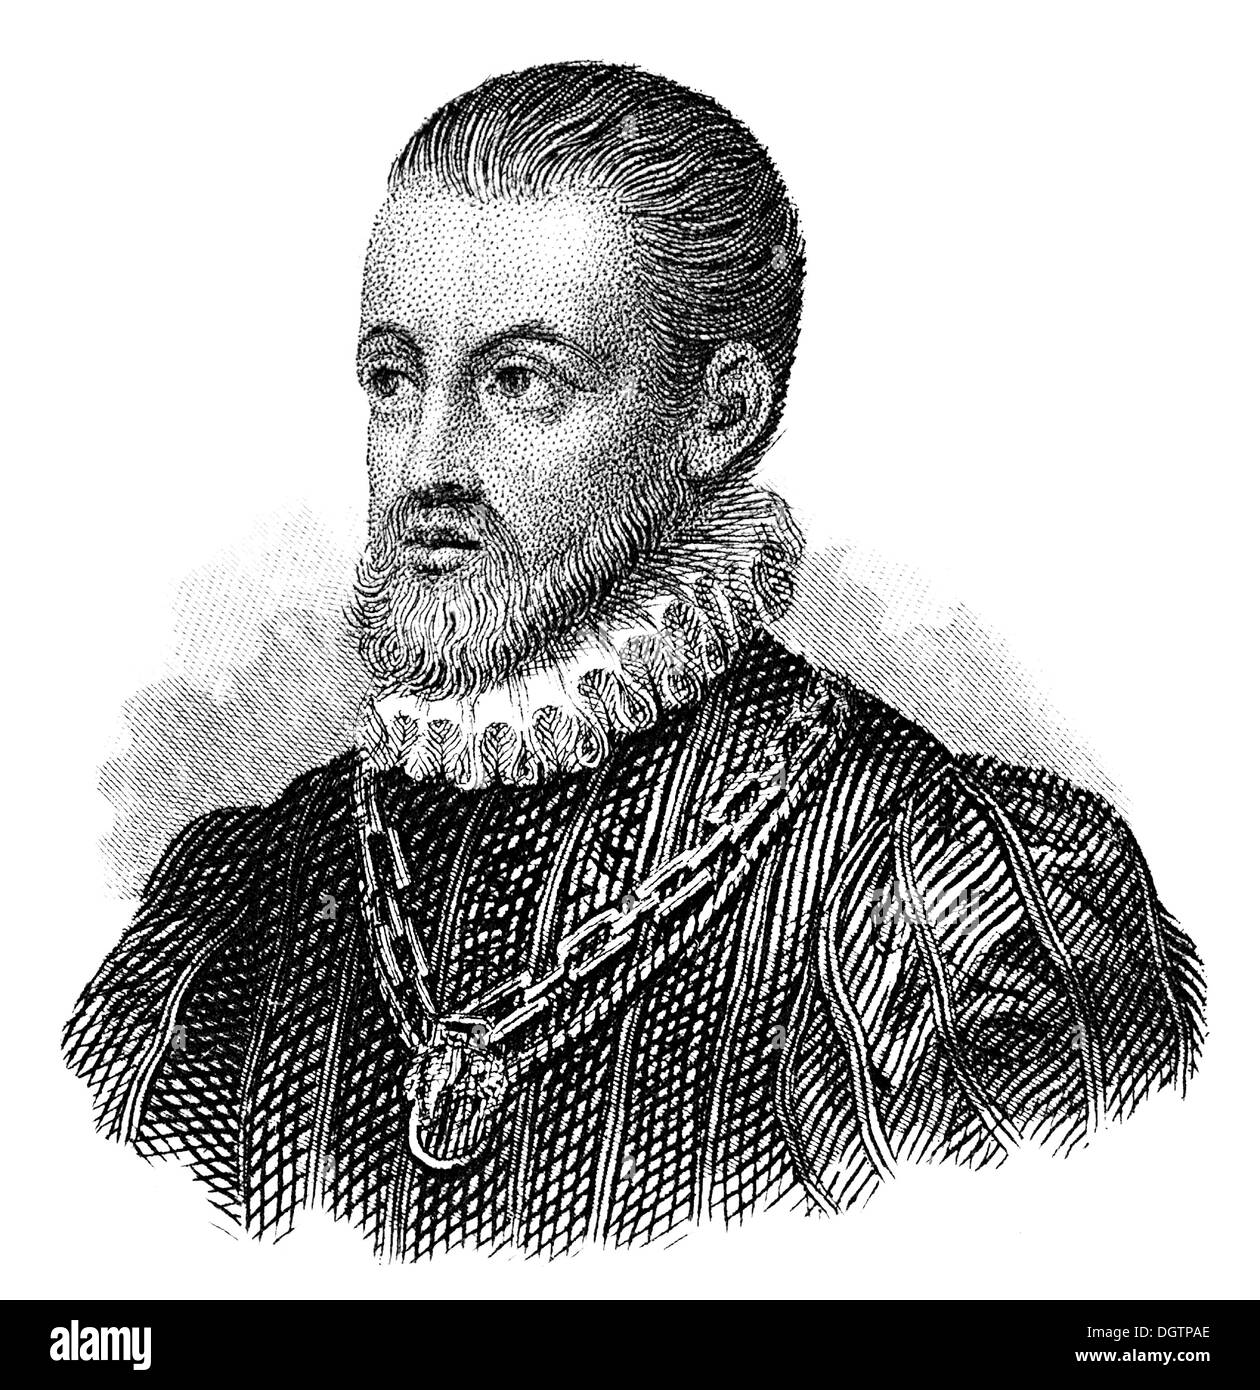 portrait of Philip II of Spain, 1527 - 1598, King of Spain, the Netherlands and Portugal Stock Photo